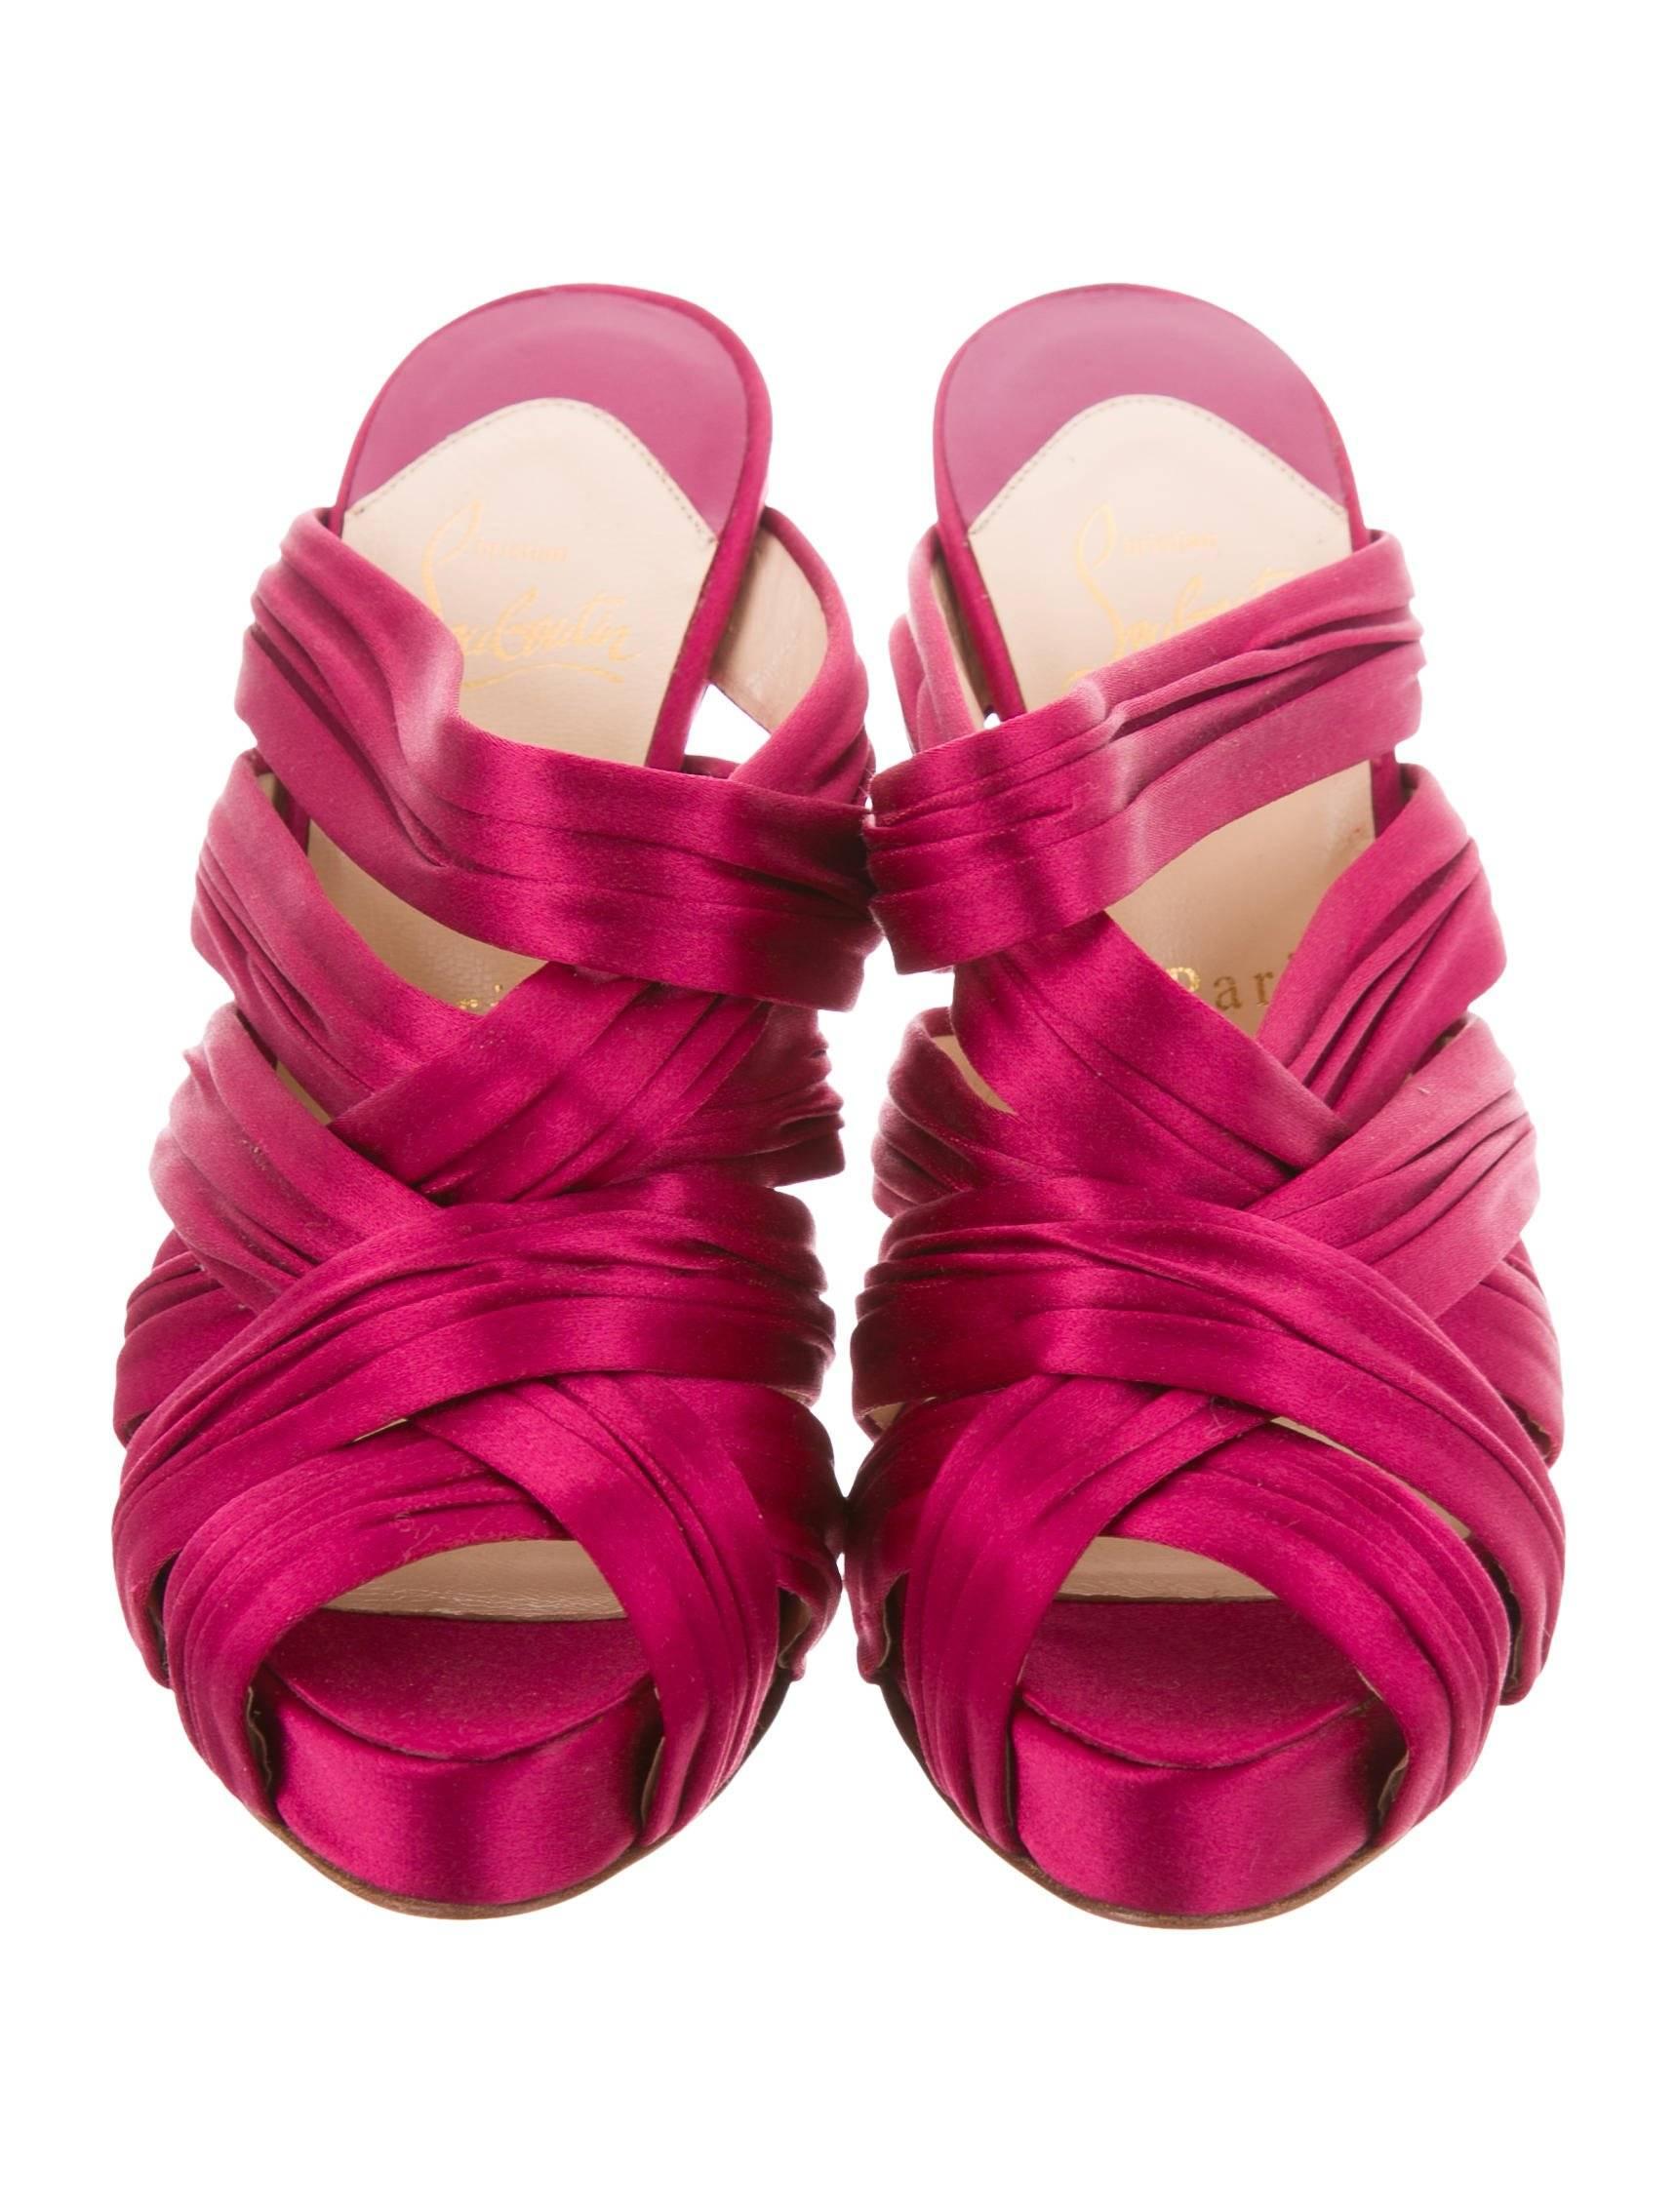 Christian Louboutin NEW Fuschia Satin Slide in Evening Sandals Heels 


Size IT 36.5
Satin 
Made in Italy
Slide on
Platform 1